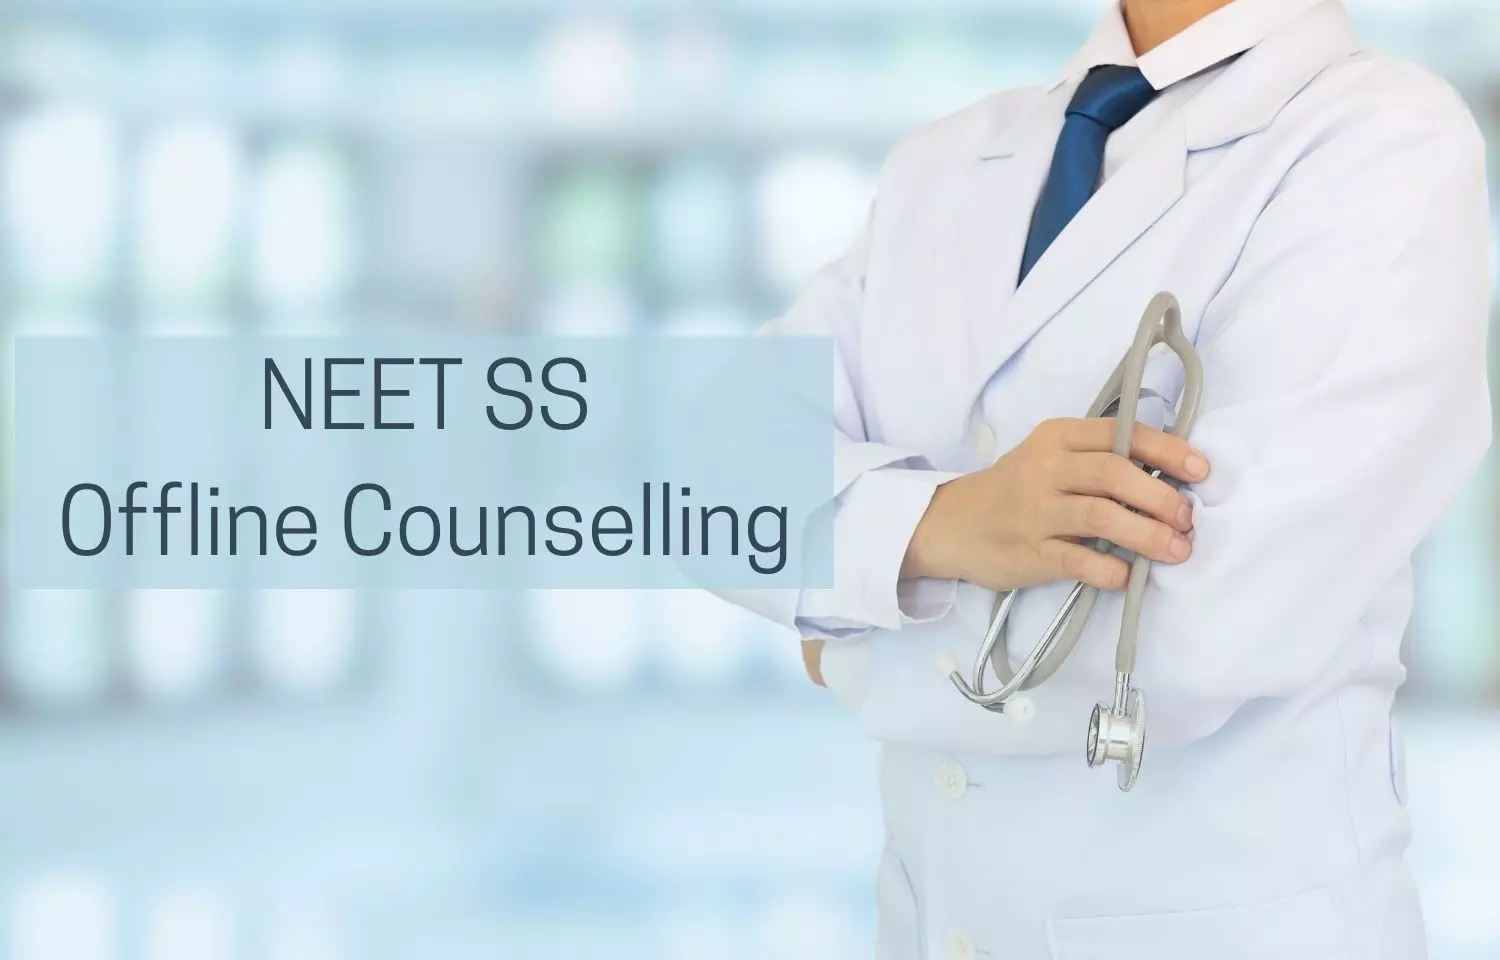 MCC tells Kerala Medical College to hold offline counselling for vacant NEET SS seat, releases schedule, list of eligible candidates